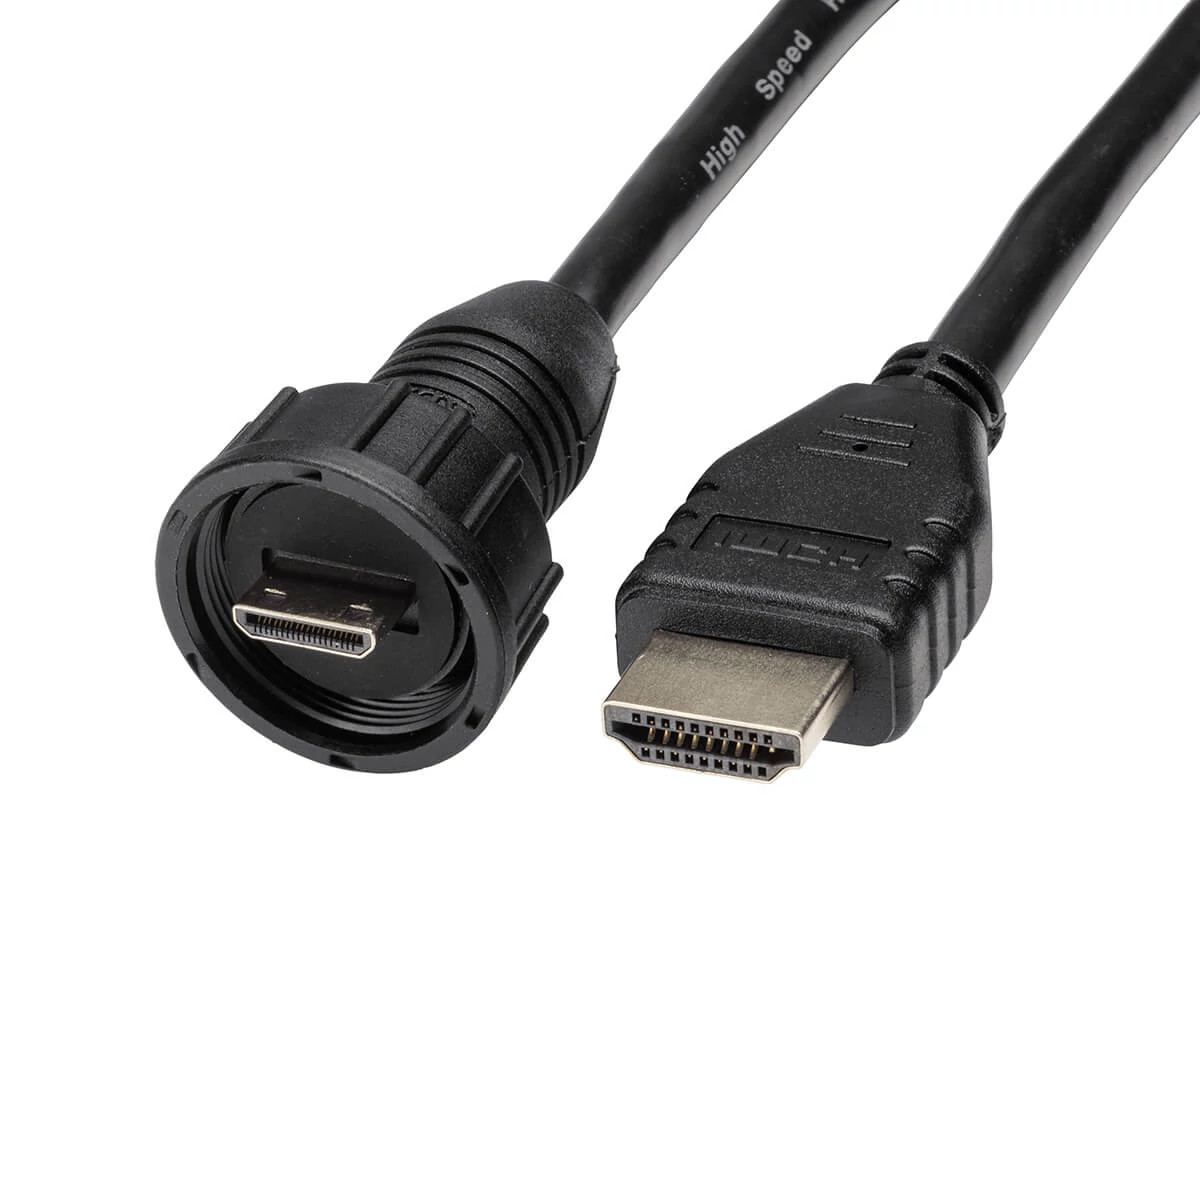 Honger waardigheid Ja AD HDMI OUT 10 - HDMI Video Out Cable - Humminbird